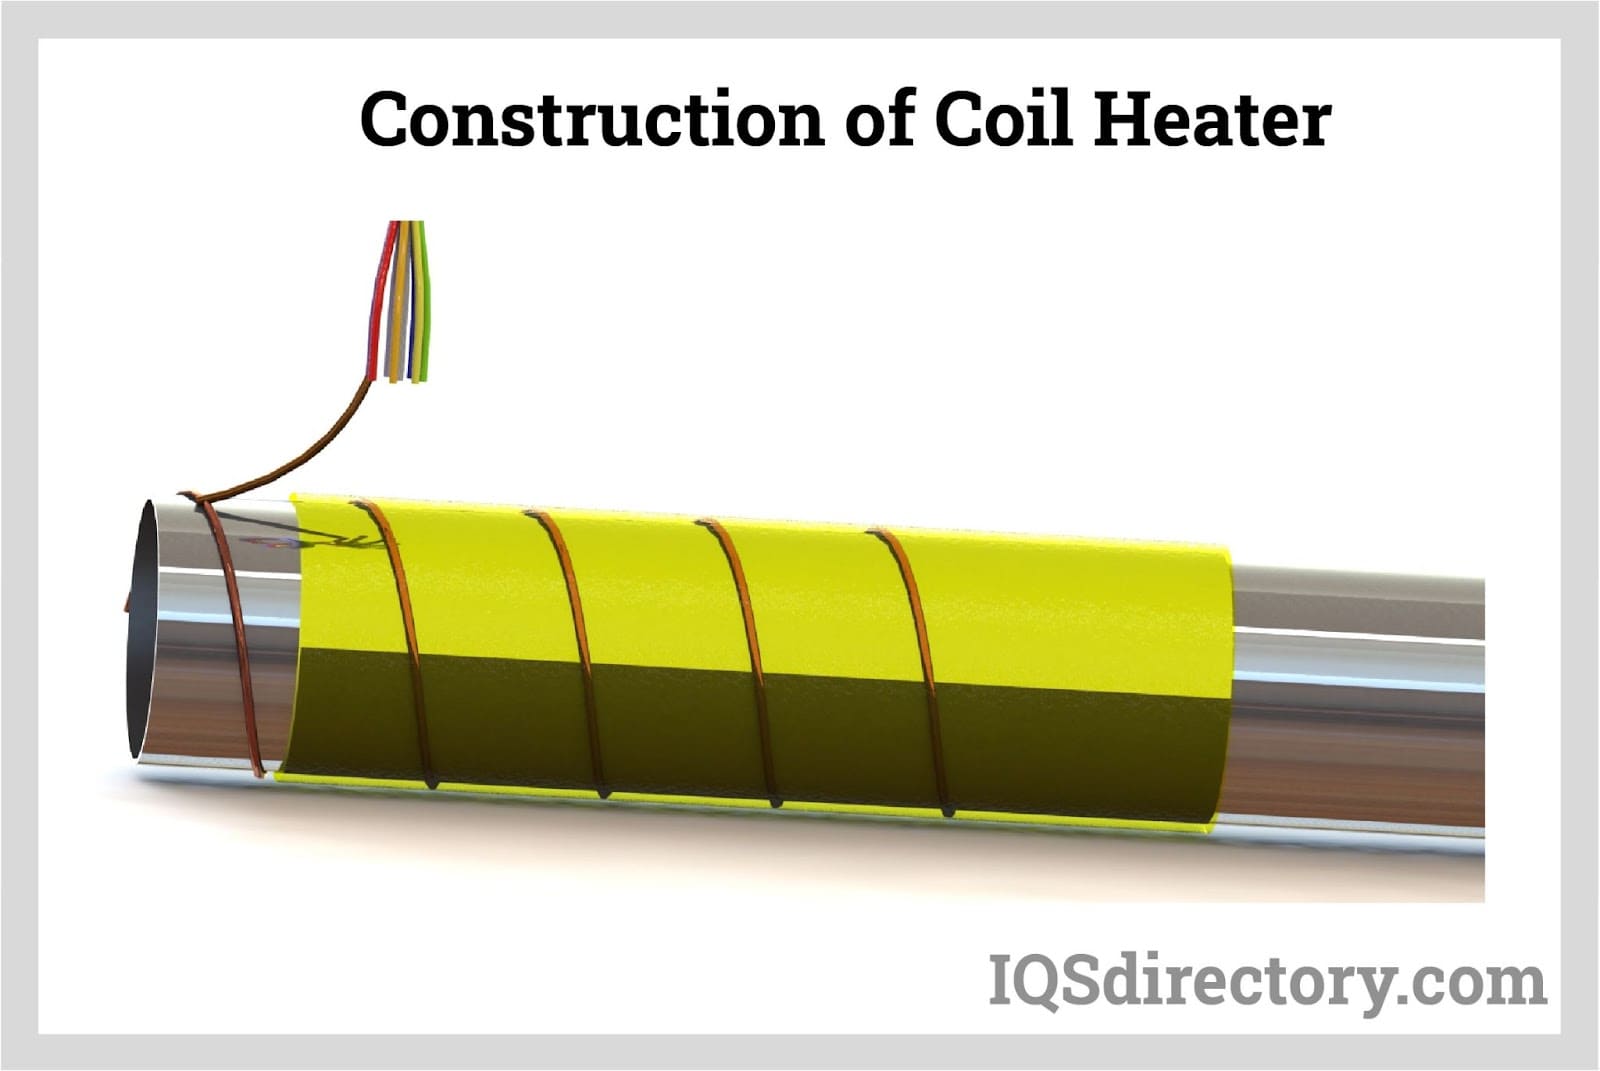 Construction of Coil Heater